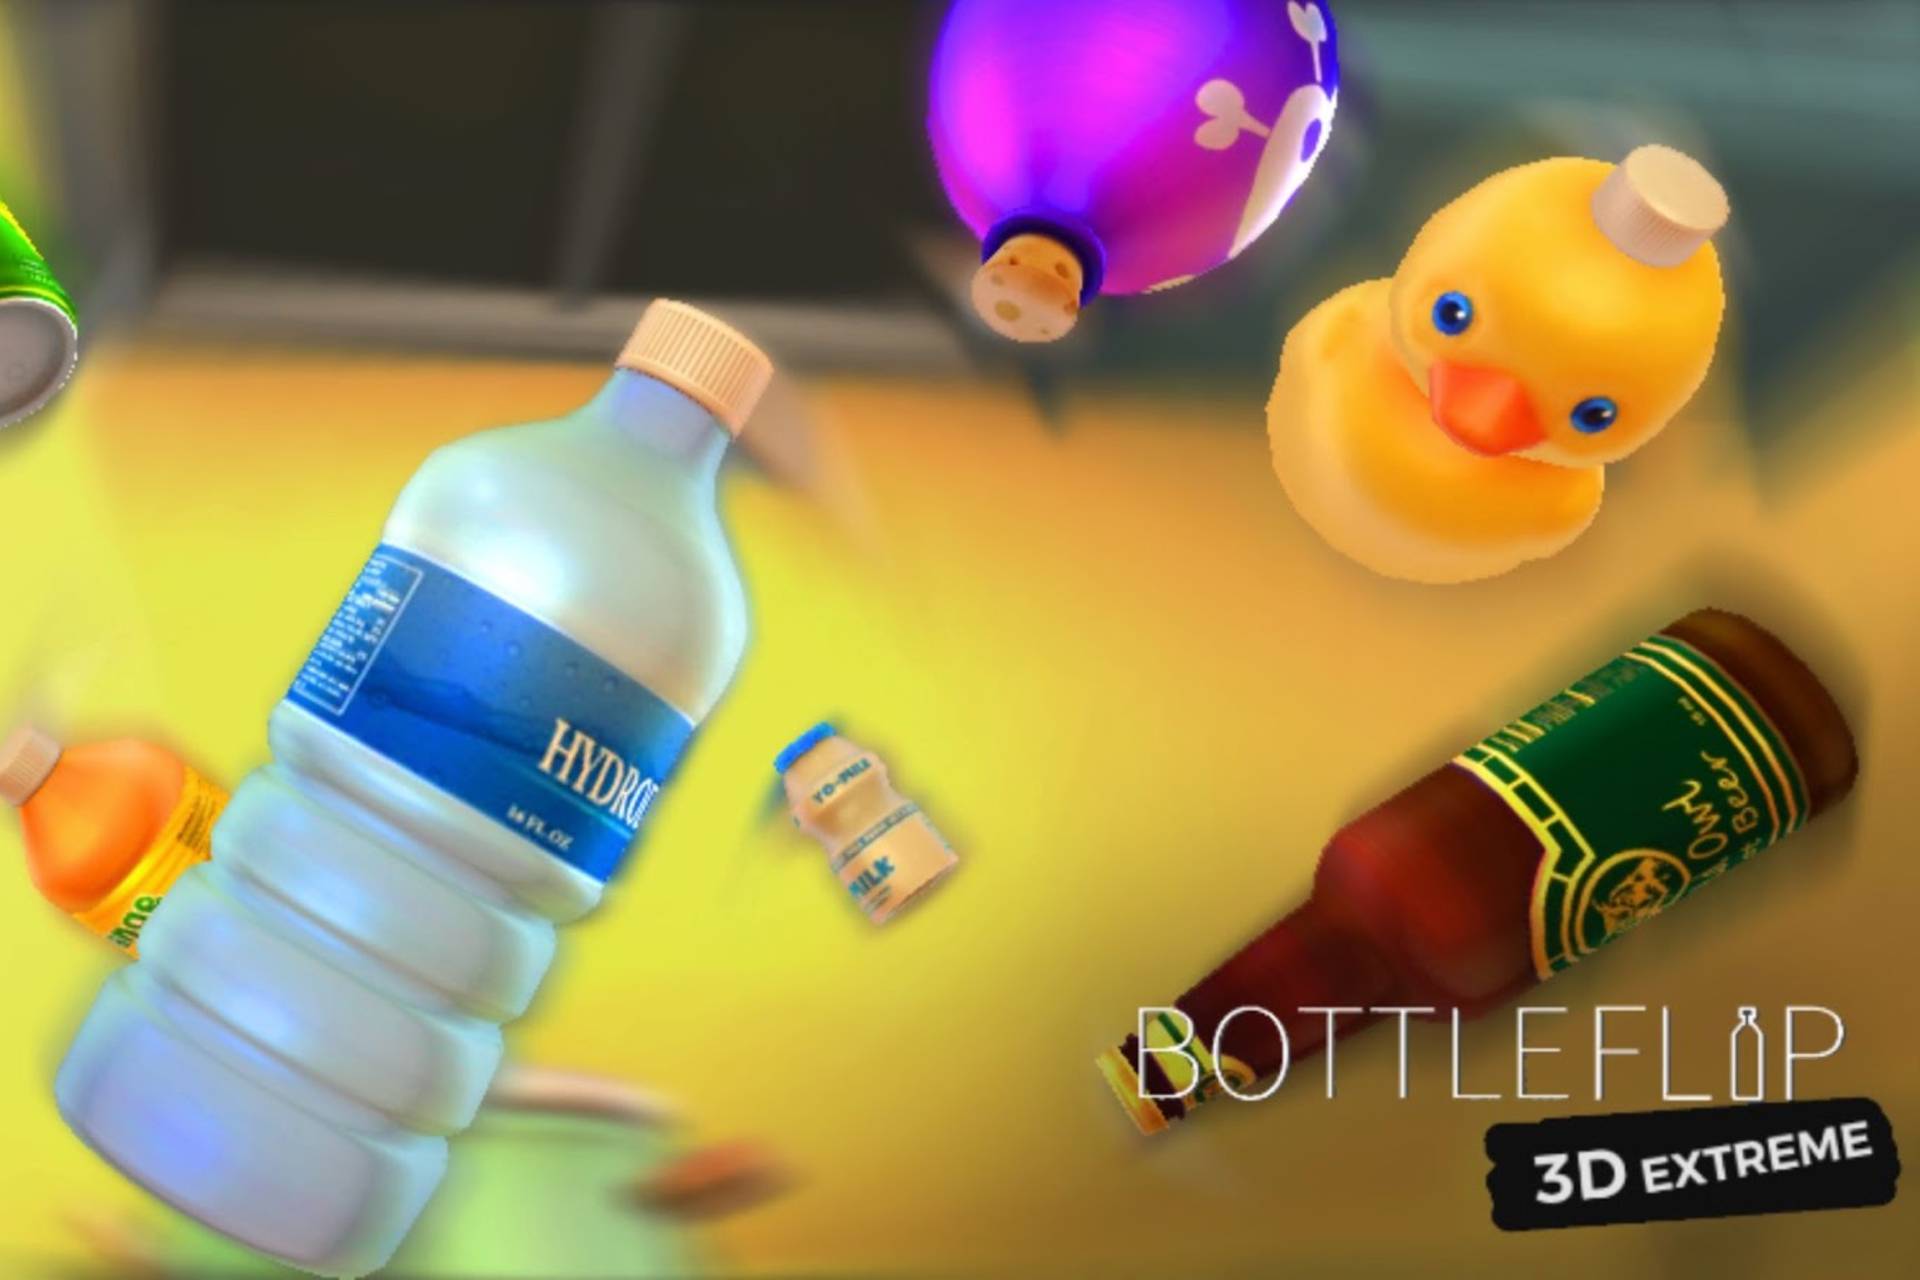 In Bottle Flip 3D Extreme, coins are used to unlock more difficult and fun bottles at the store. The more difficult bottles are harder to land but award more points. There are plenty of bottles to unlock, from glass bottles to soft drink cans, even a soap dispenser!